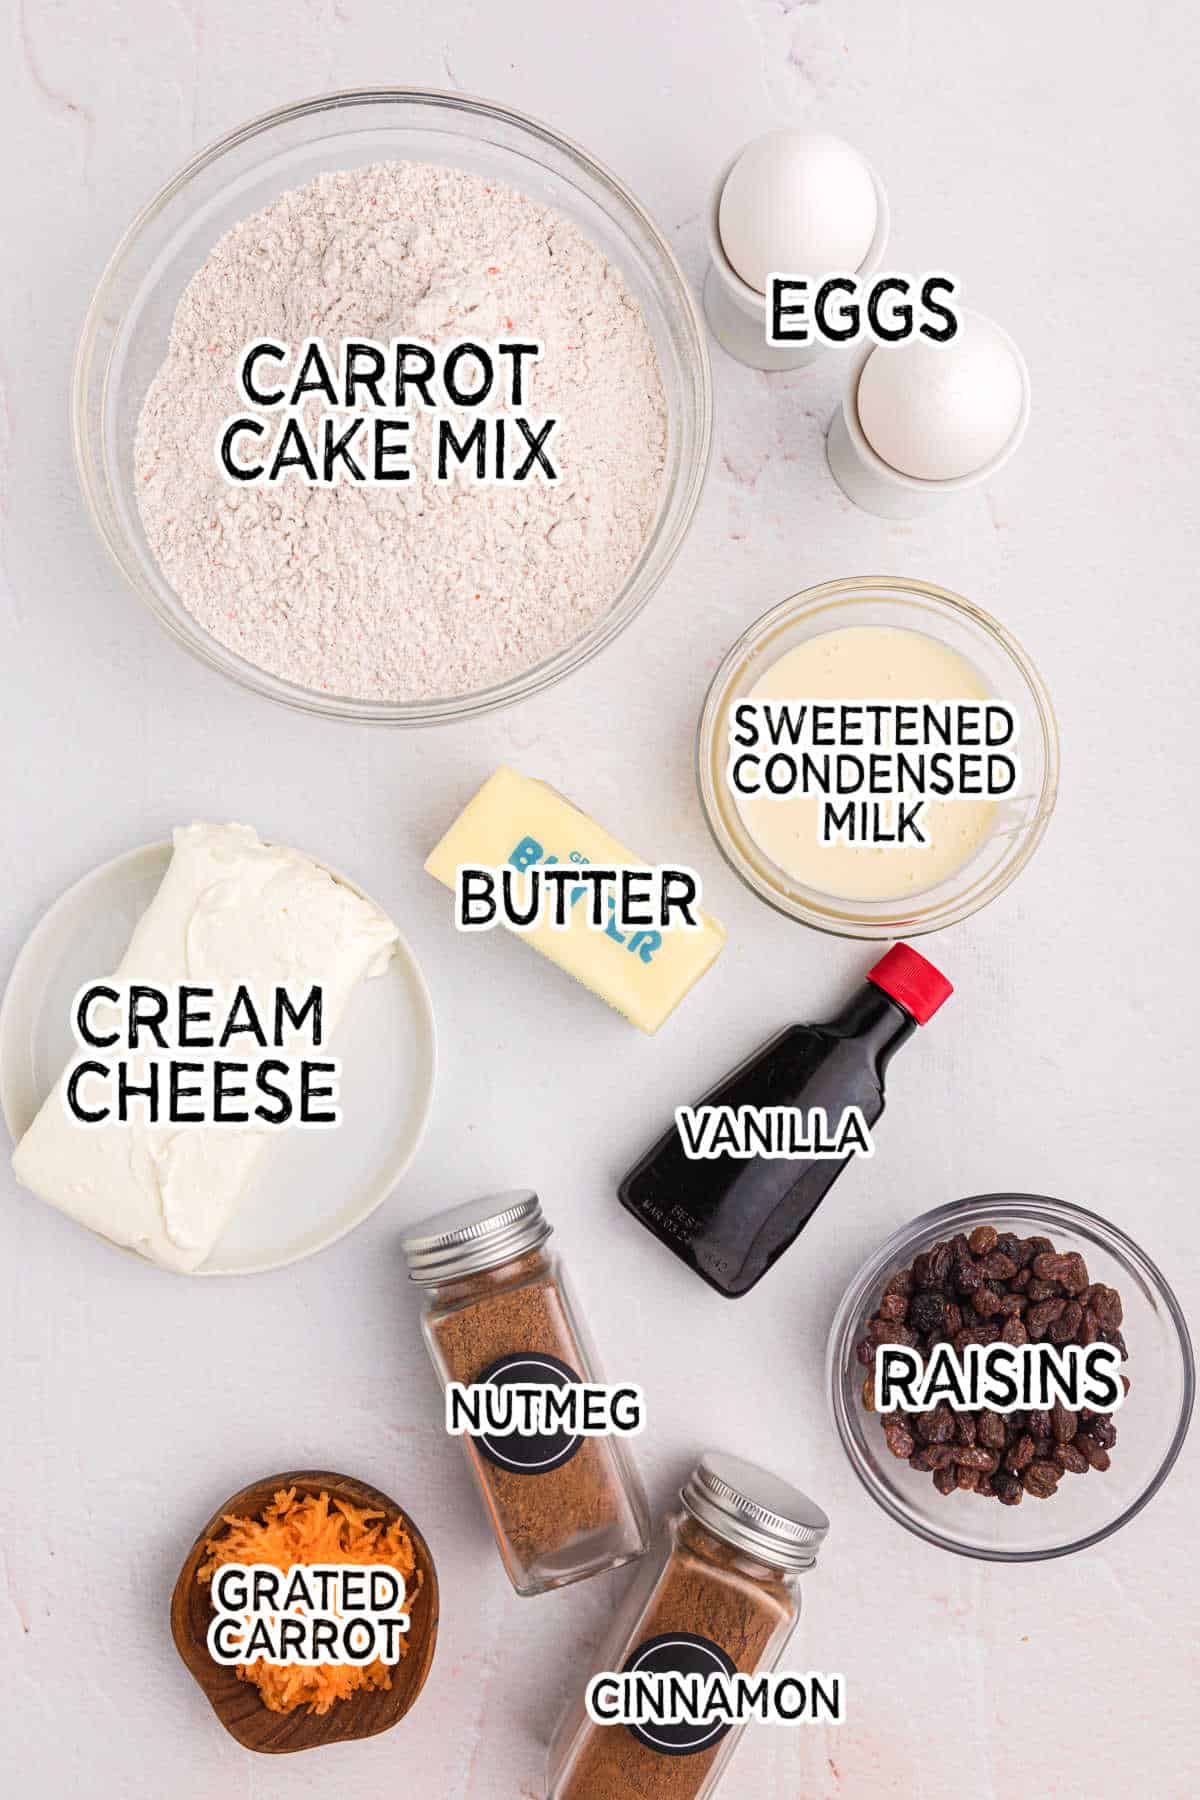 Carrot cake cups ingredients.